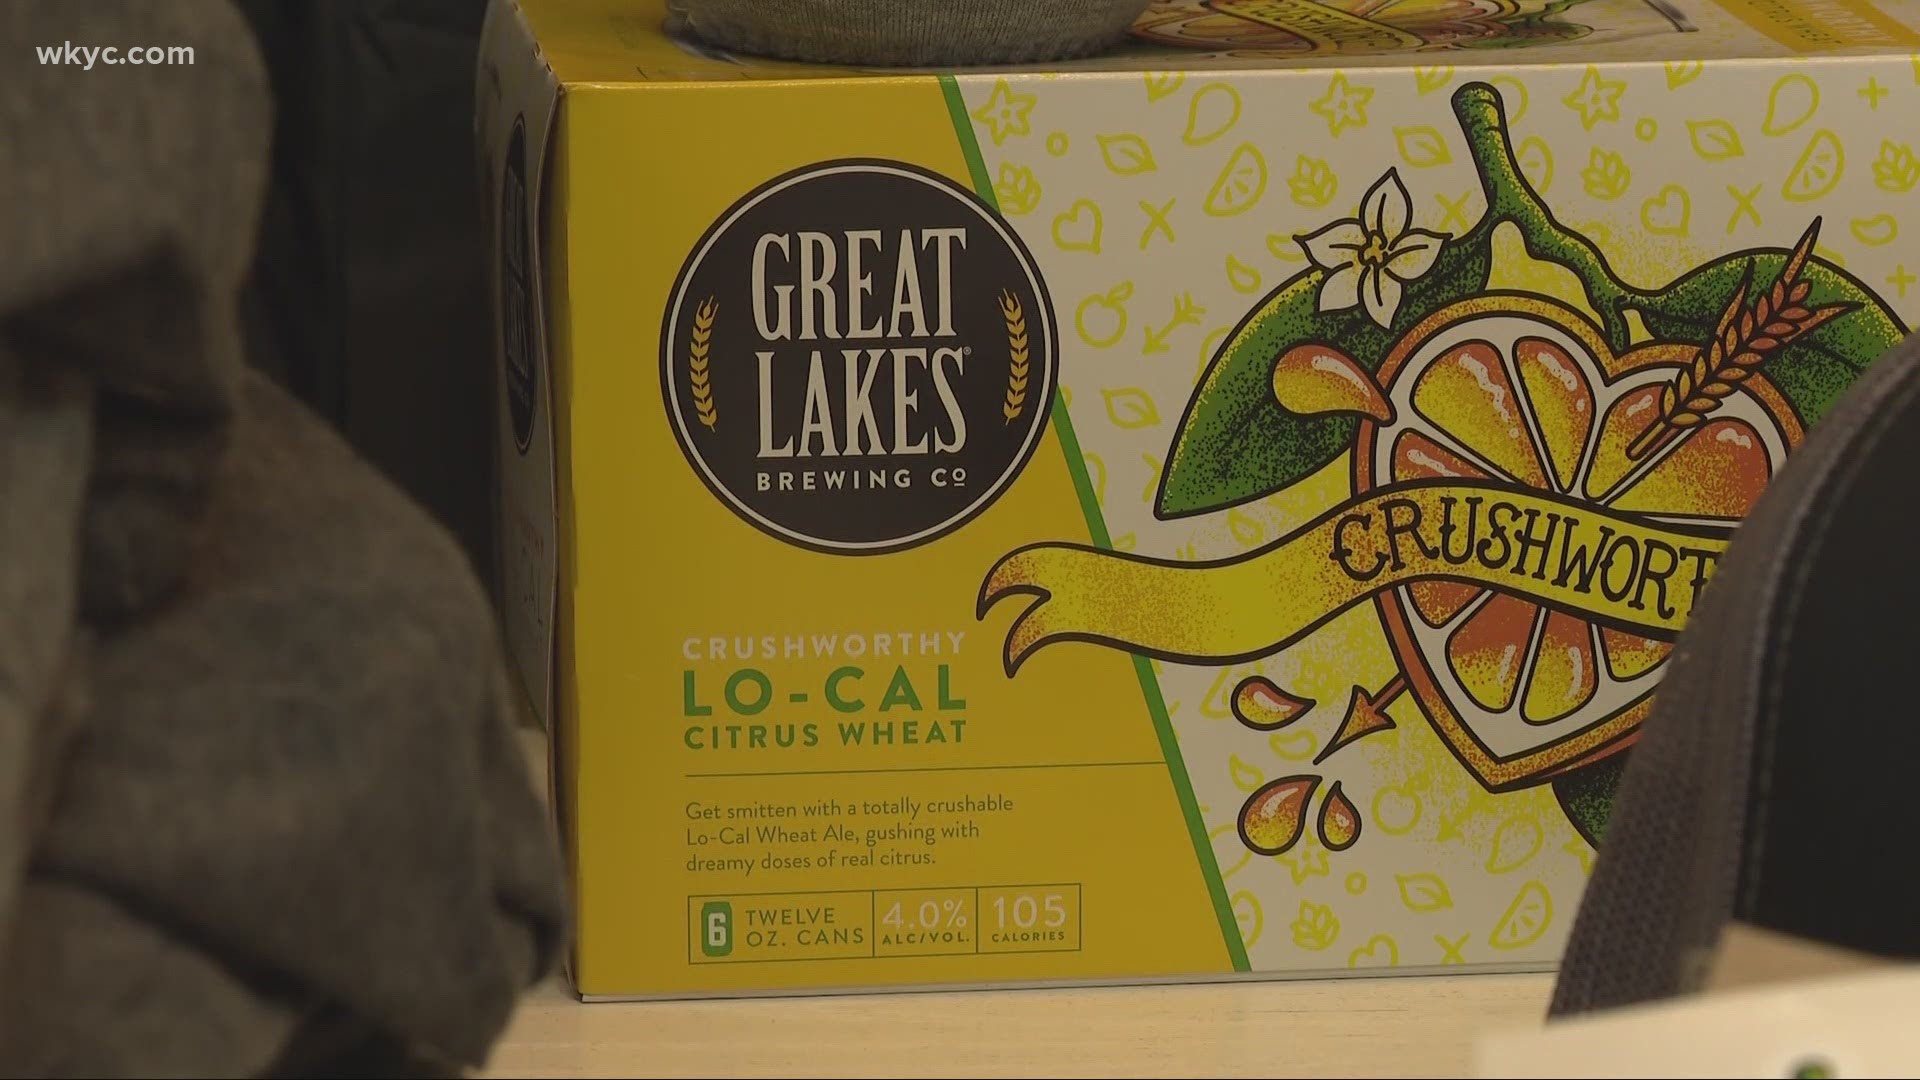 A new taste accompanied by fewer calories. Great Lakes has launched the new crush worthy low cal citrus wheat, hoping to win over the more health conscious consumer.